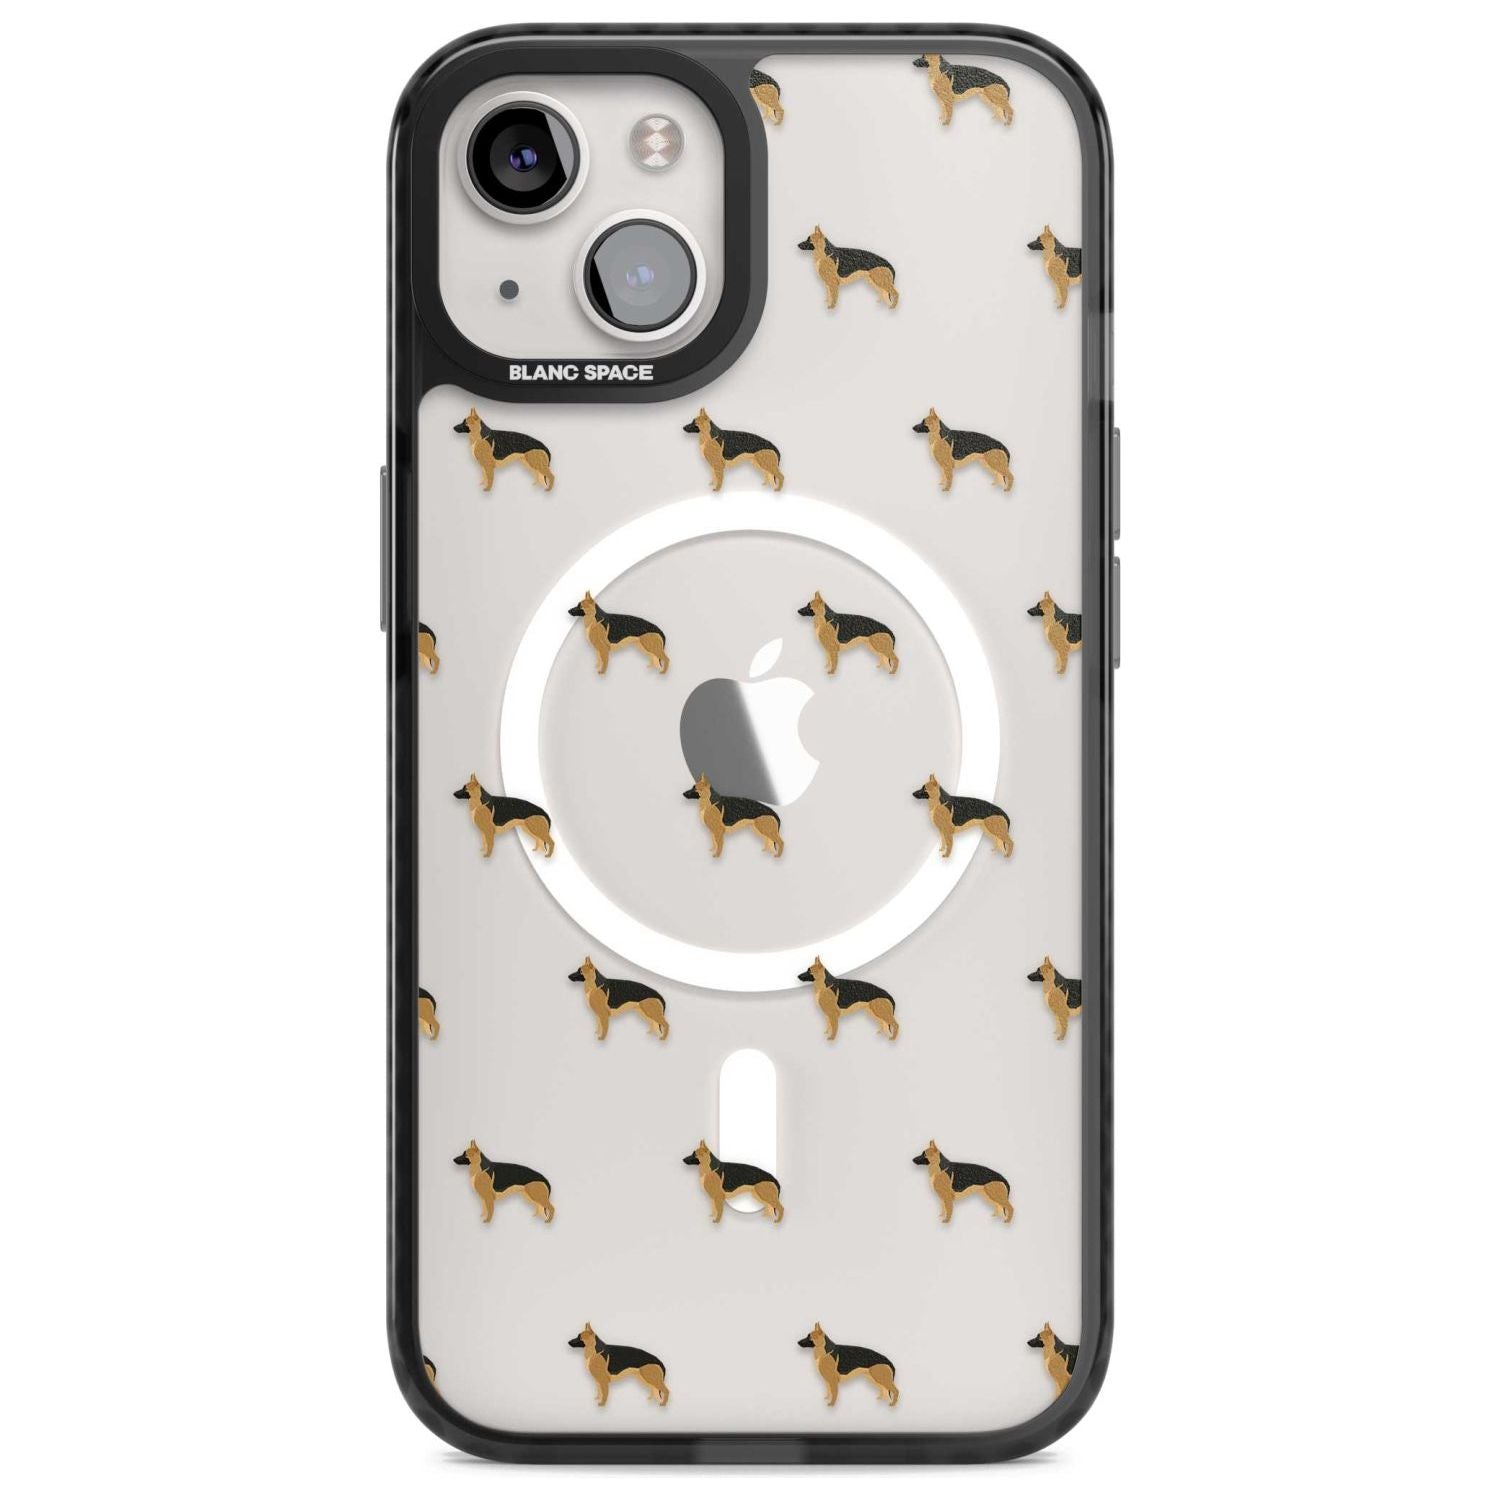 German Sherpard Dog Pattern Clear Phone Case iPhone 15 Plus / Magsafe Black Impact Case,iPhone 15 / Magsafe Black Impact Case,iPhone 14 Plus / Magsafe Black Impact Case,iPhone 14 / Magsafe Black Impact Case,iPhone 13 / Magsafe Black Impact Case Blanc Space